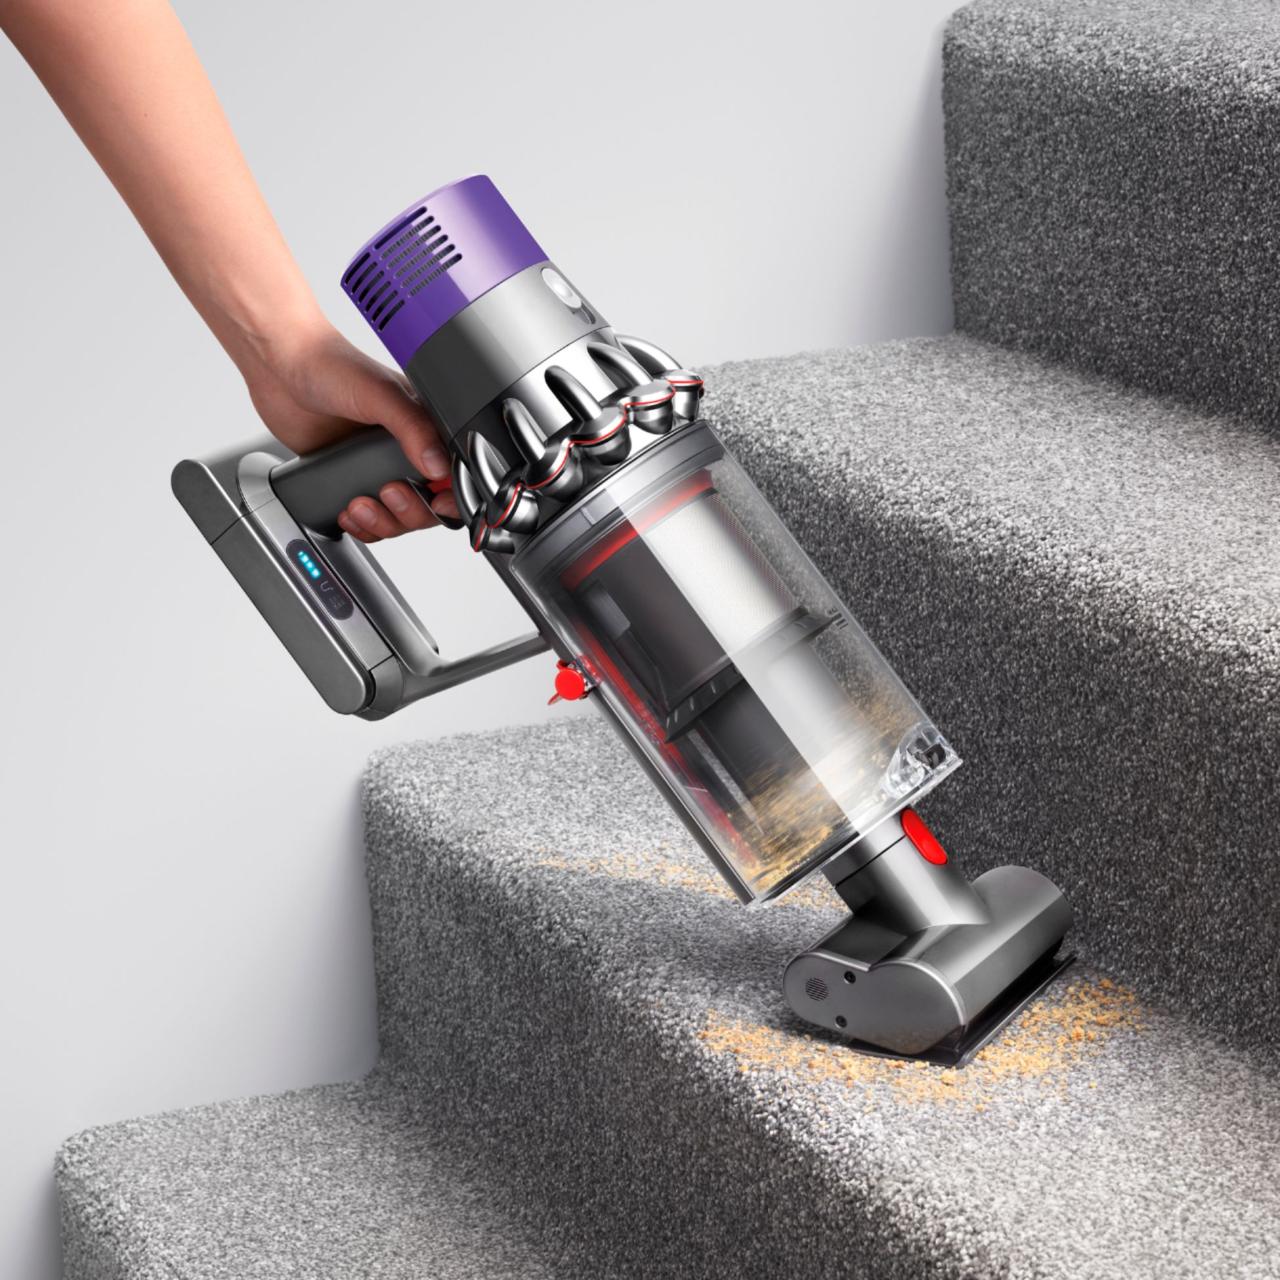 Dyson V10 Animal : We do carry additional tools/attachments, which can be purchased at your